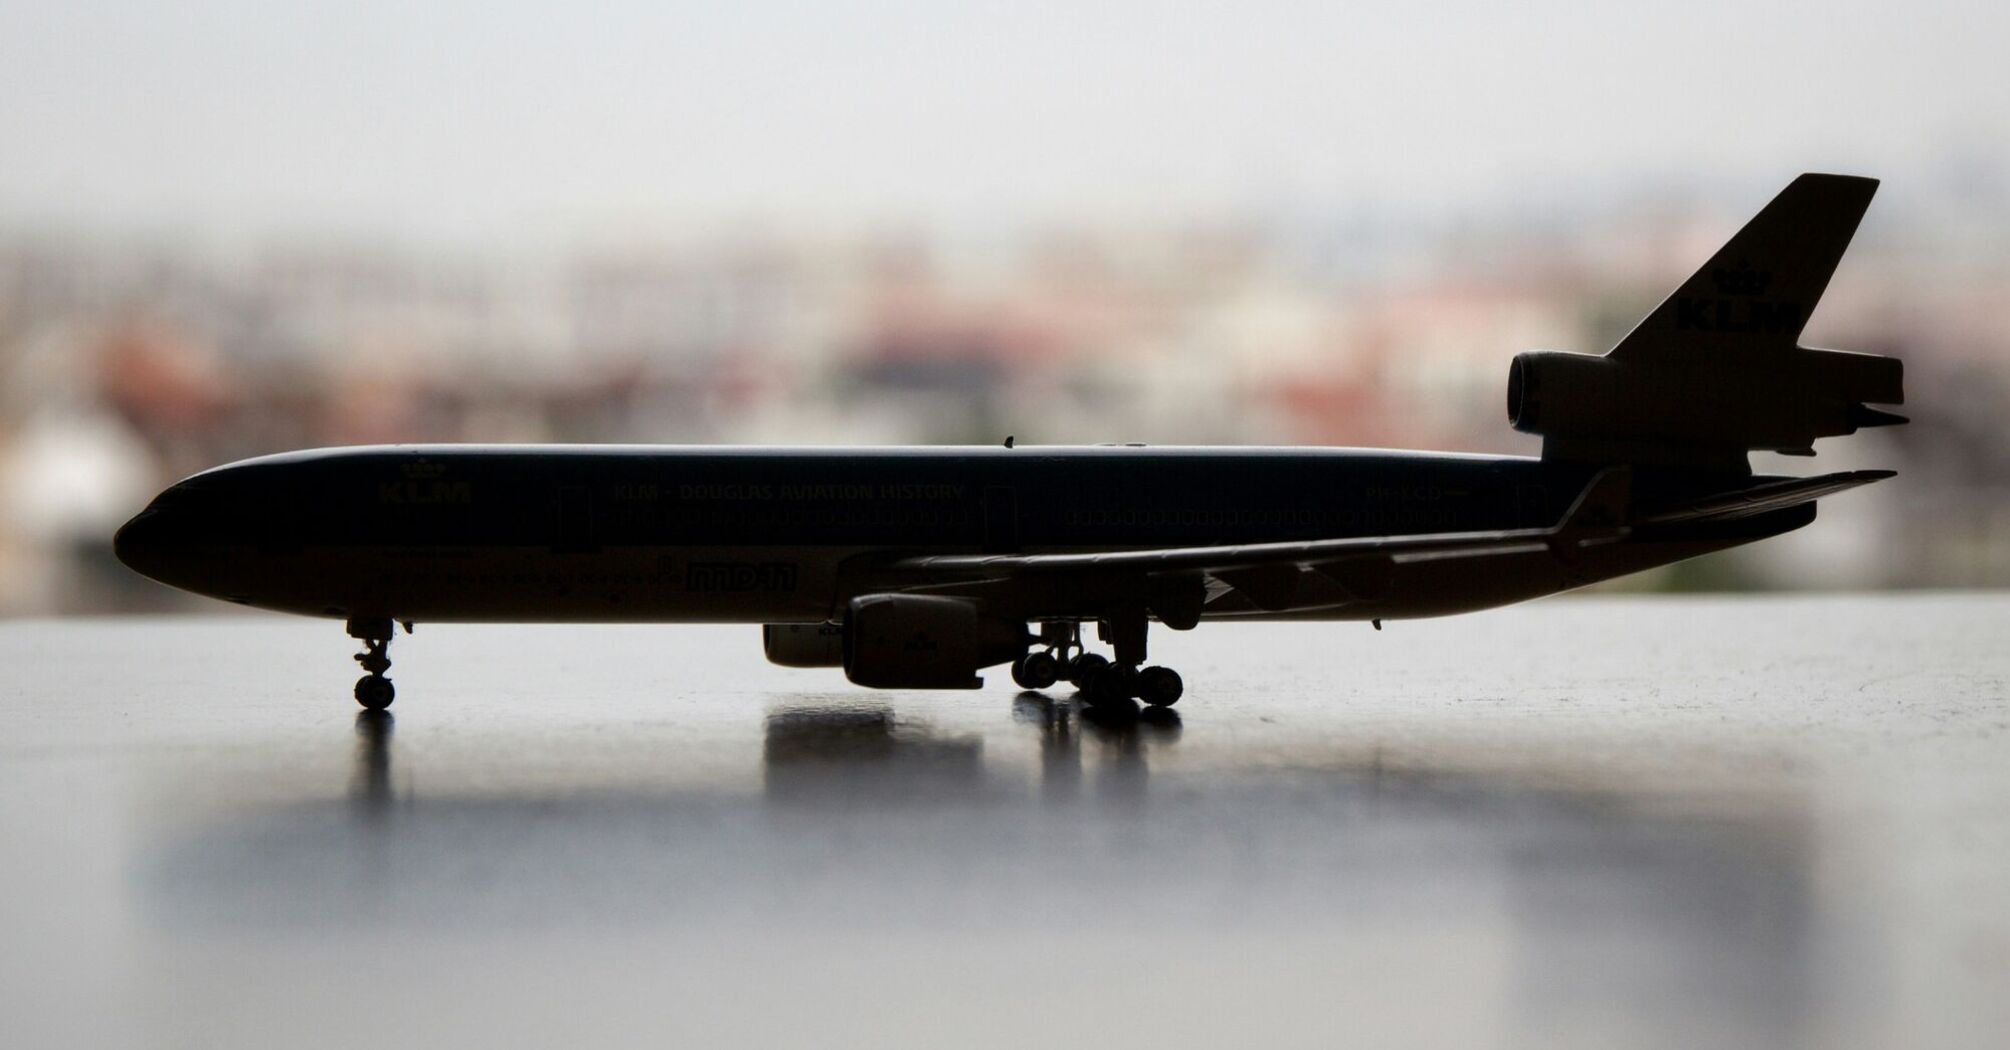 Silhouette of a model airplane against a blurred cityscape background